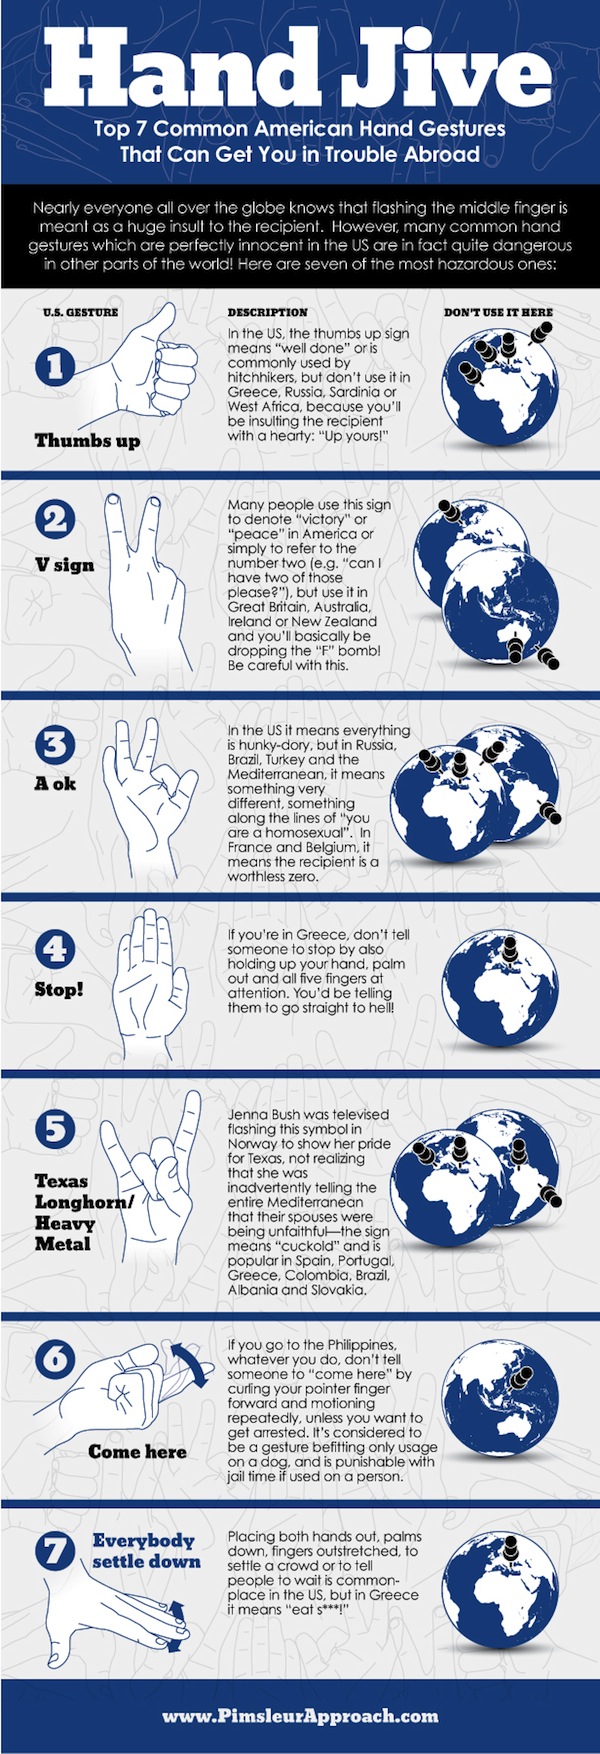 Offensive Hand Gestures Abroad